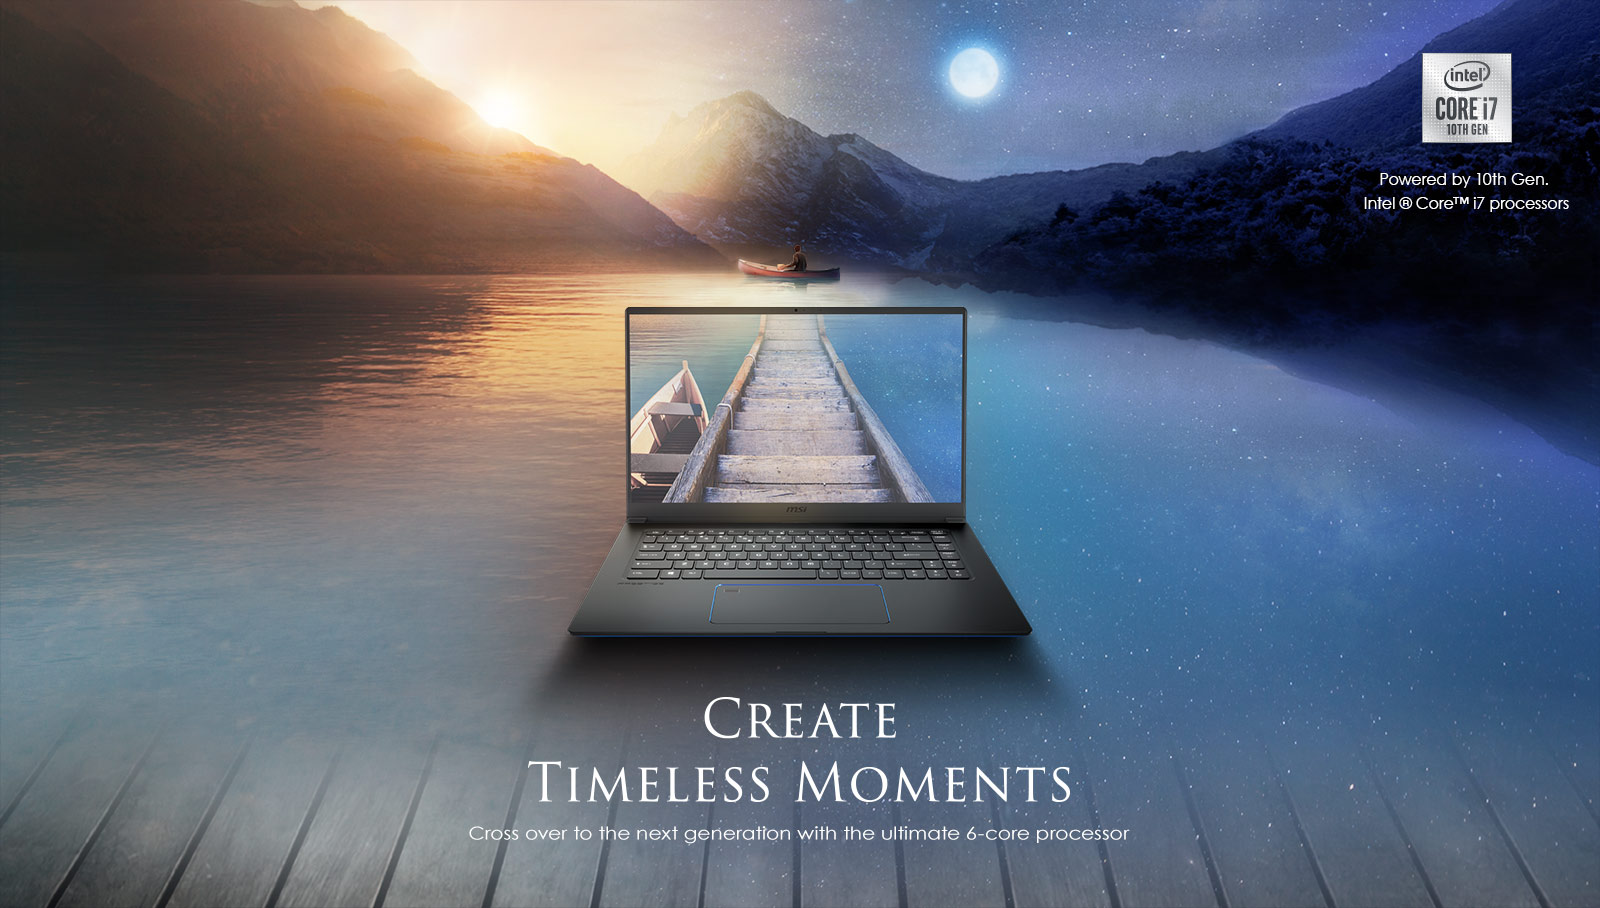 MSI Prestige 15 Lie on the Center. Background Fills in the Landscape of Sunset and Night Combination. Right Top There's Intel Core i7 10th Gen's logo. The Text on Image Reads: CREATE TIMELESS MOMENTS - Cross Over the Next Generation with the Ultimate 6-core Processor.